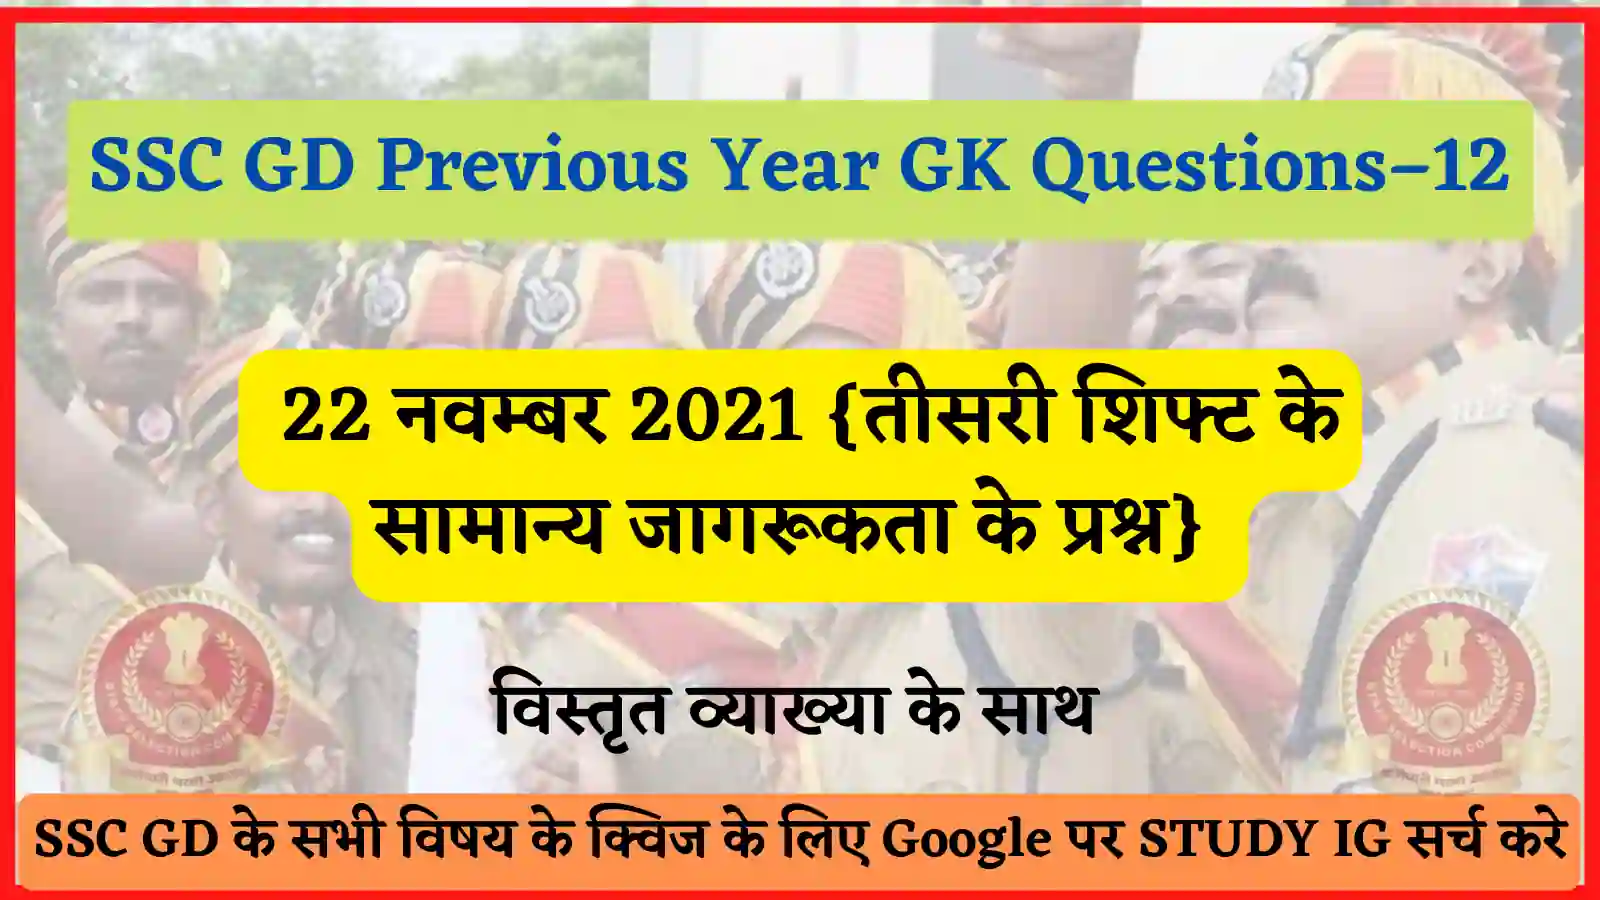 SSC GD Previous Year GK Questions / Quiz - 12